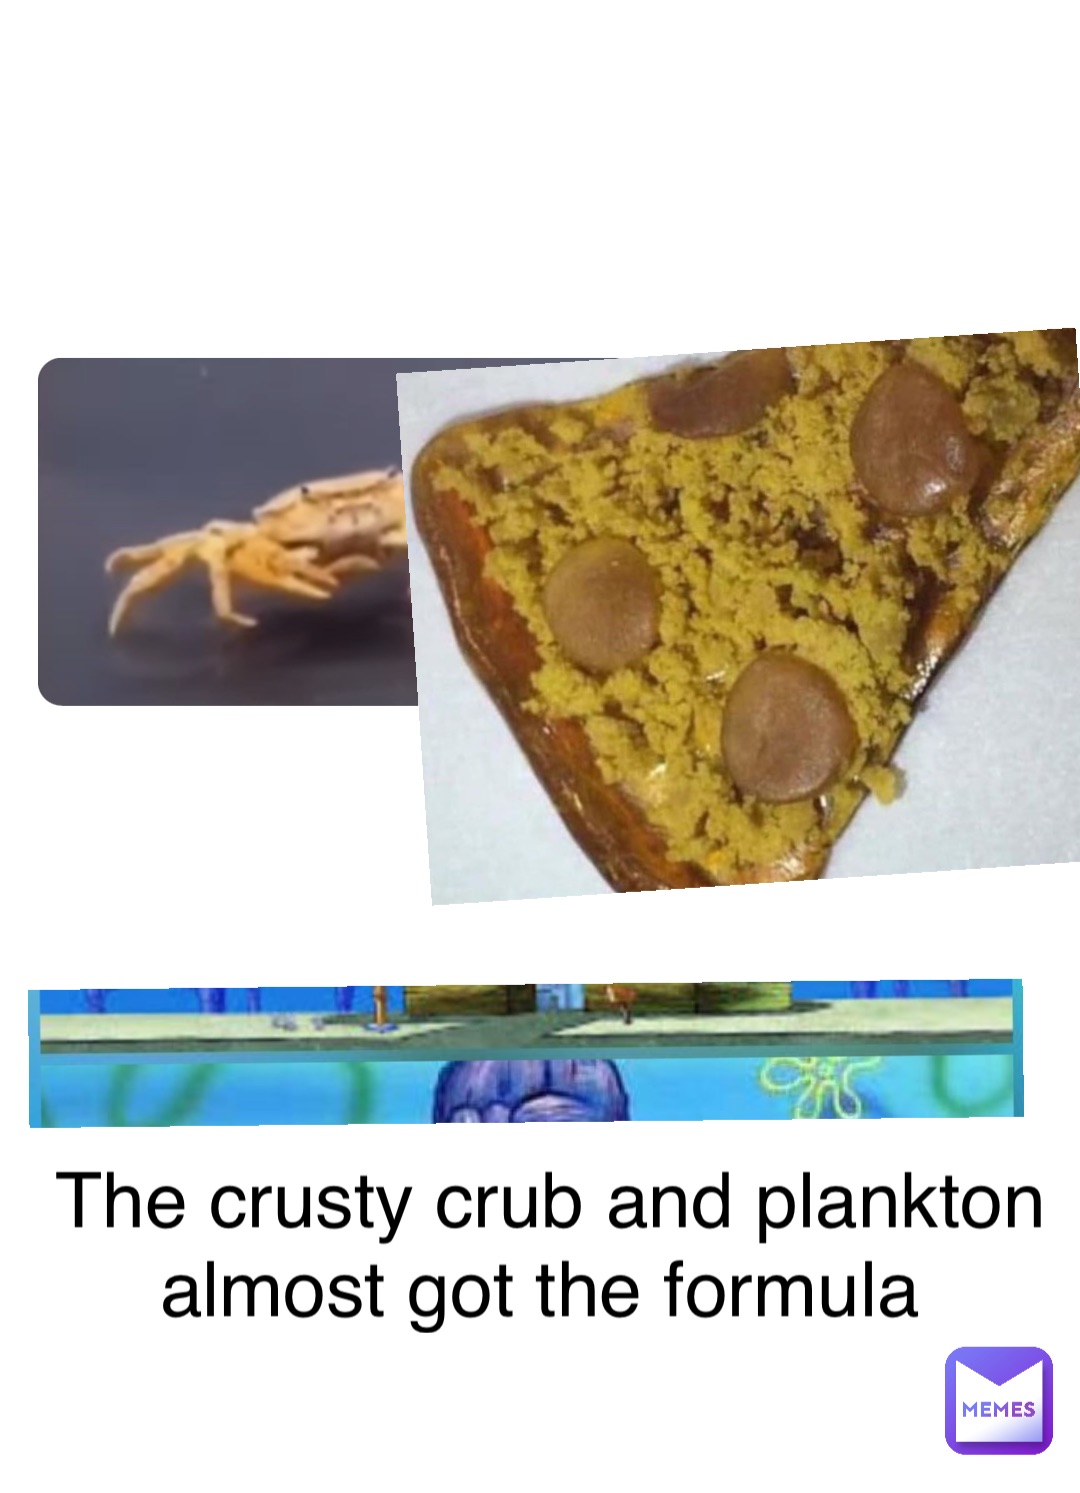 Double tap to edit The crusty crub and plankton almost got the formula